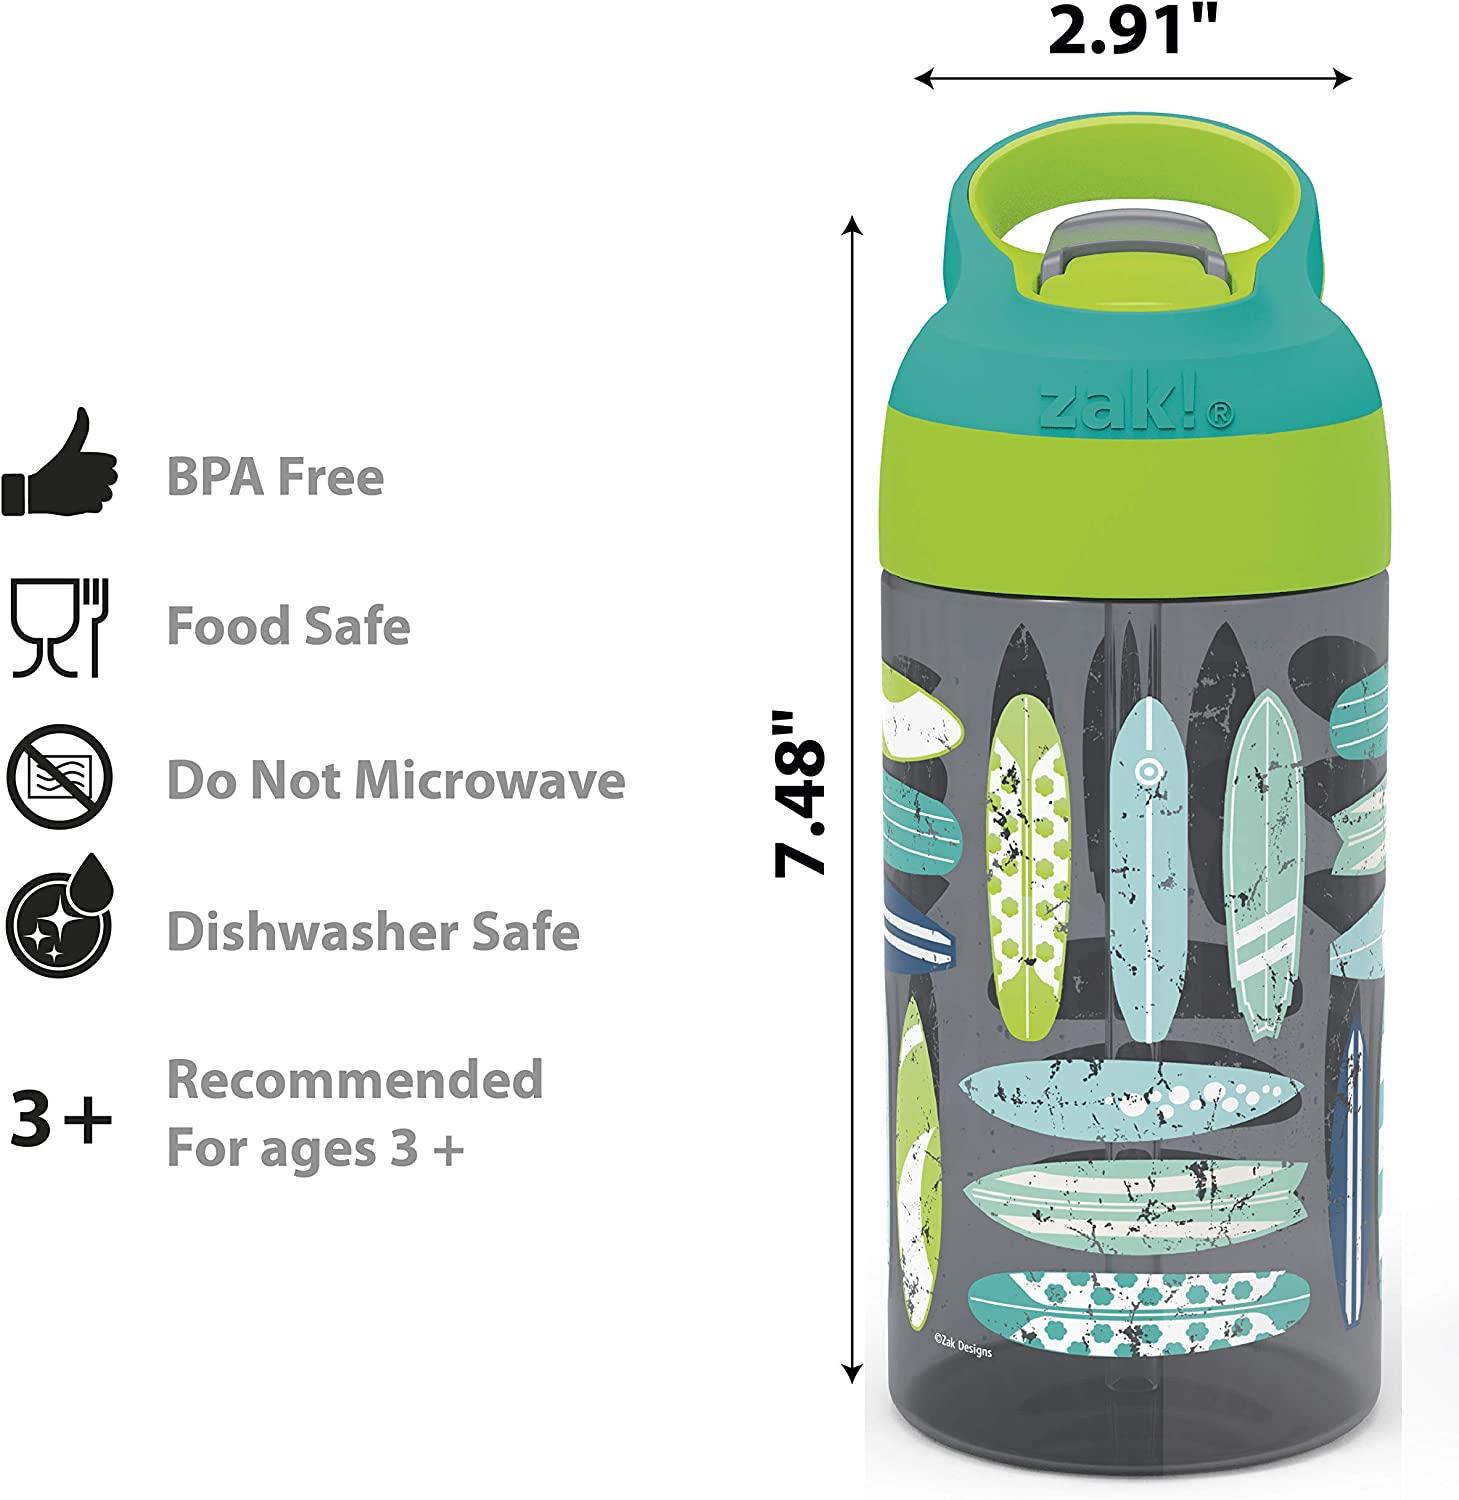 Zak Designs 16oz Riverside Kids Water Bottle with Spout Cover and Built-in  Carrying Loop, Made of Durable Plastic, Leak-Proof Water Bottle Design for